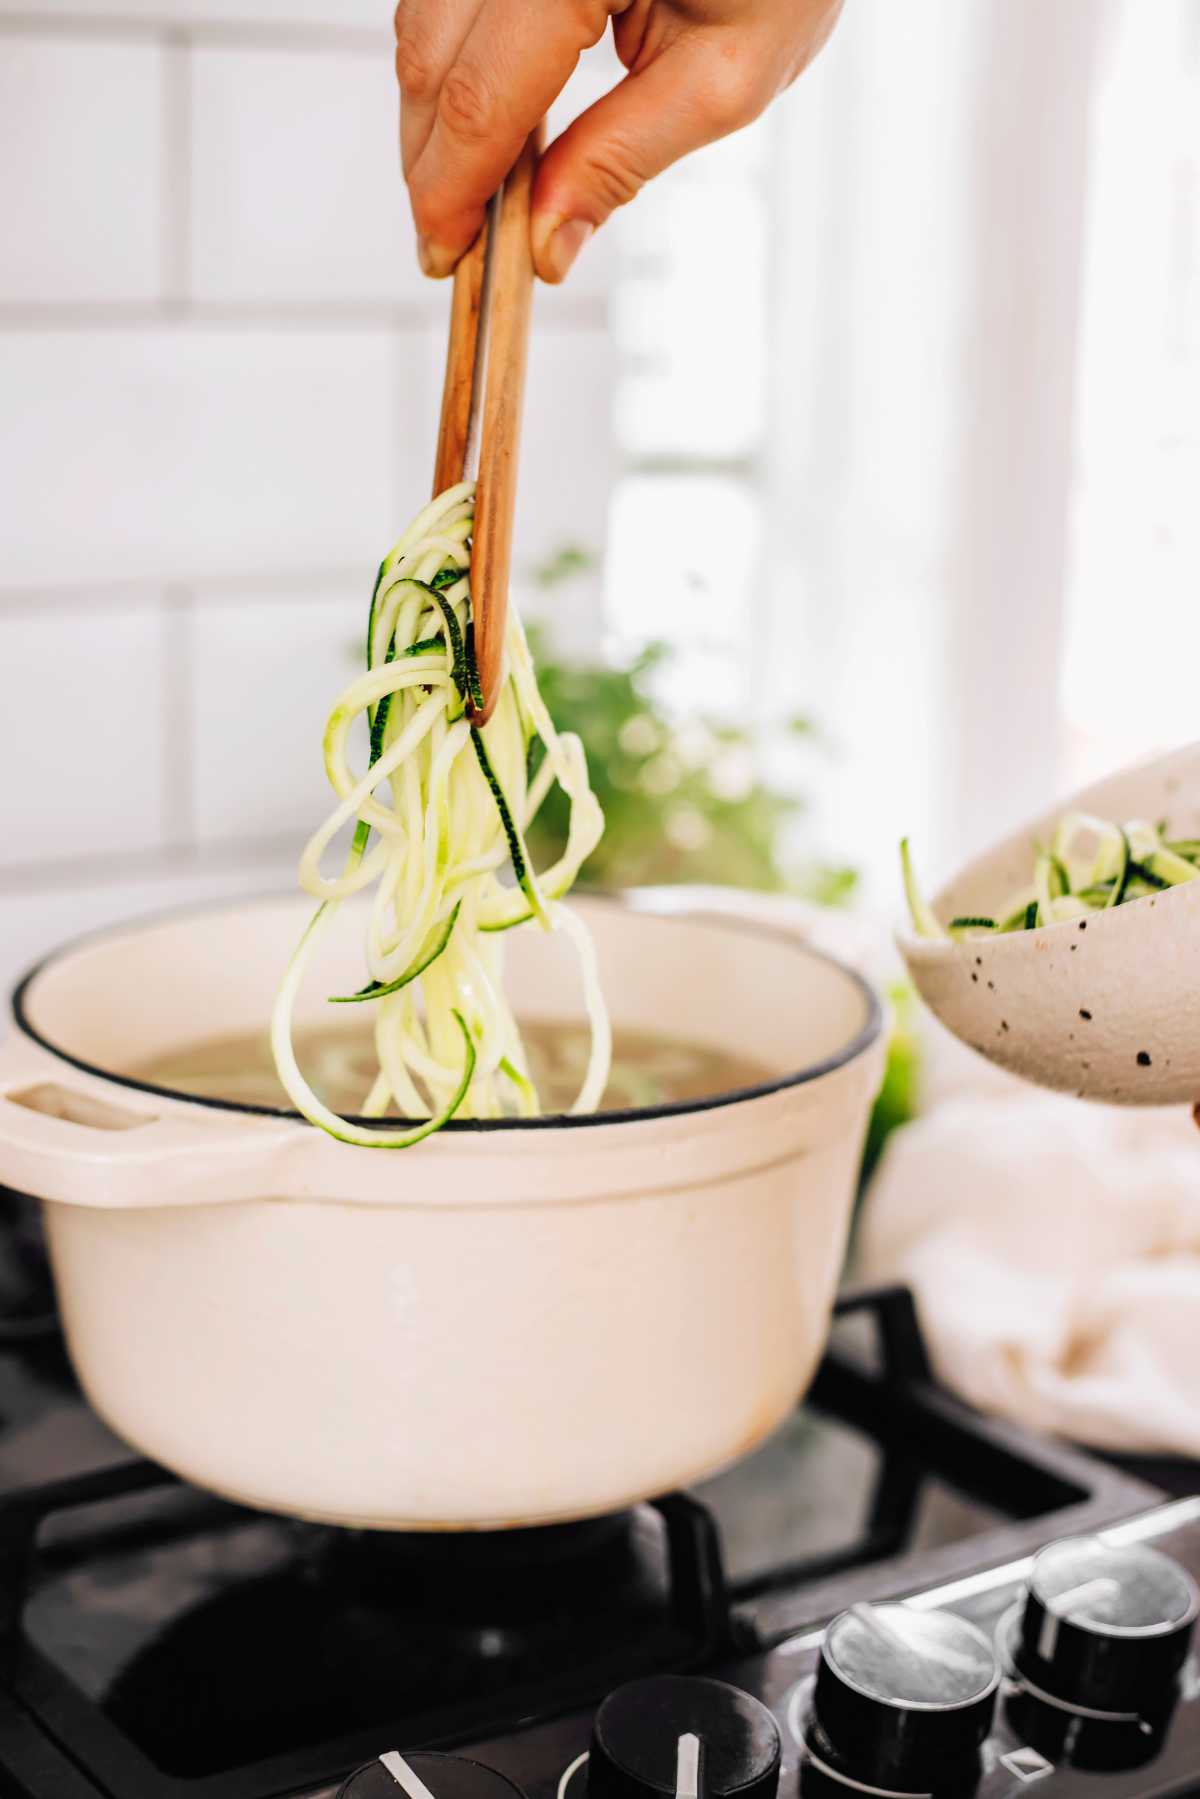 zoodles being added to a pot with waster and pasta